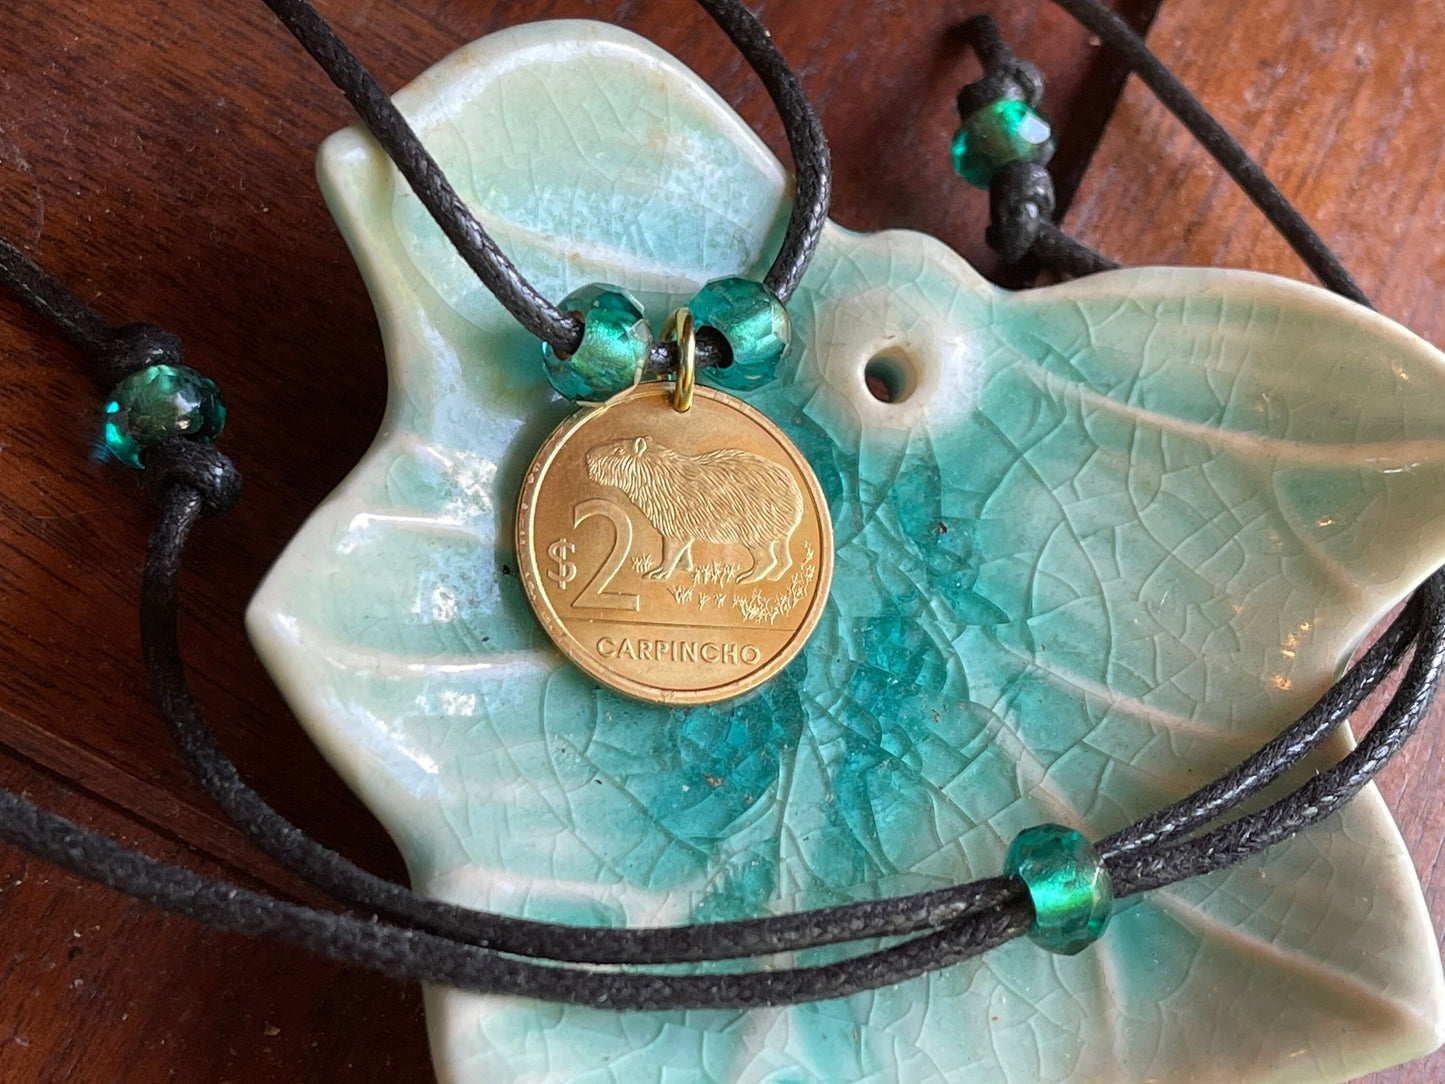 Custom coin pendant necklace made to order or kit, choose style, any coin, leather cord, beads, assorted closures, your choice color scheme